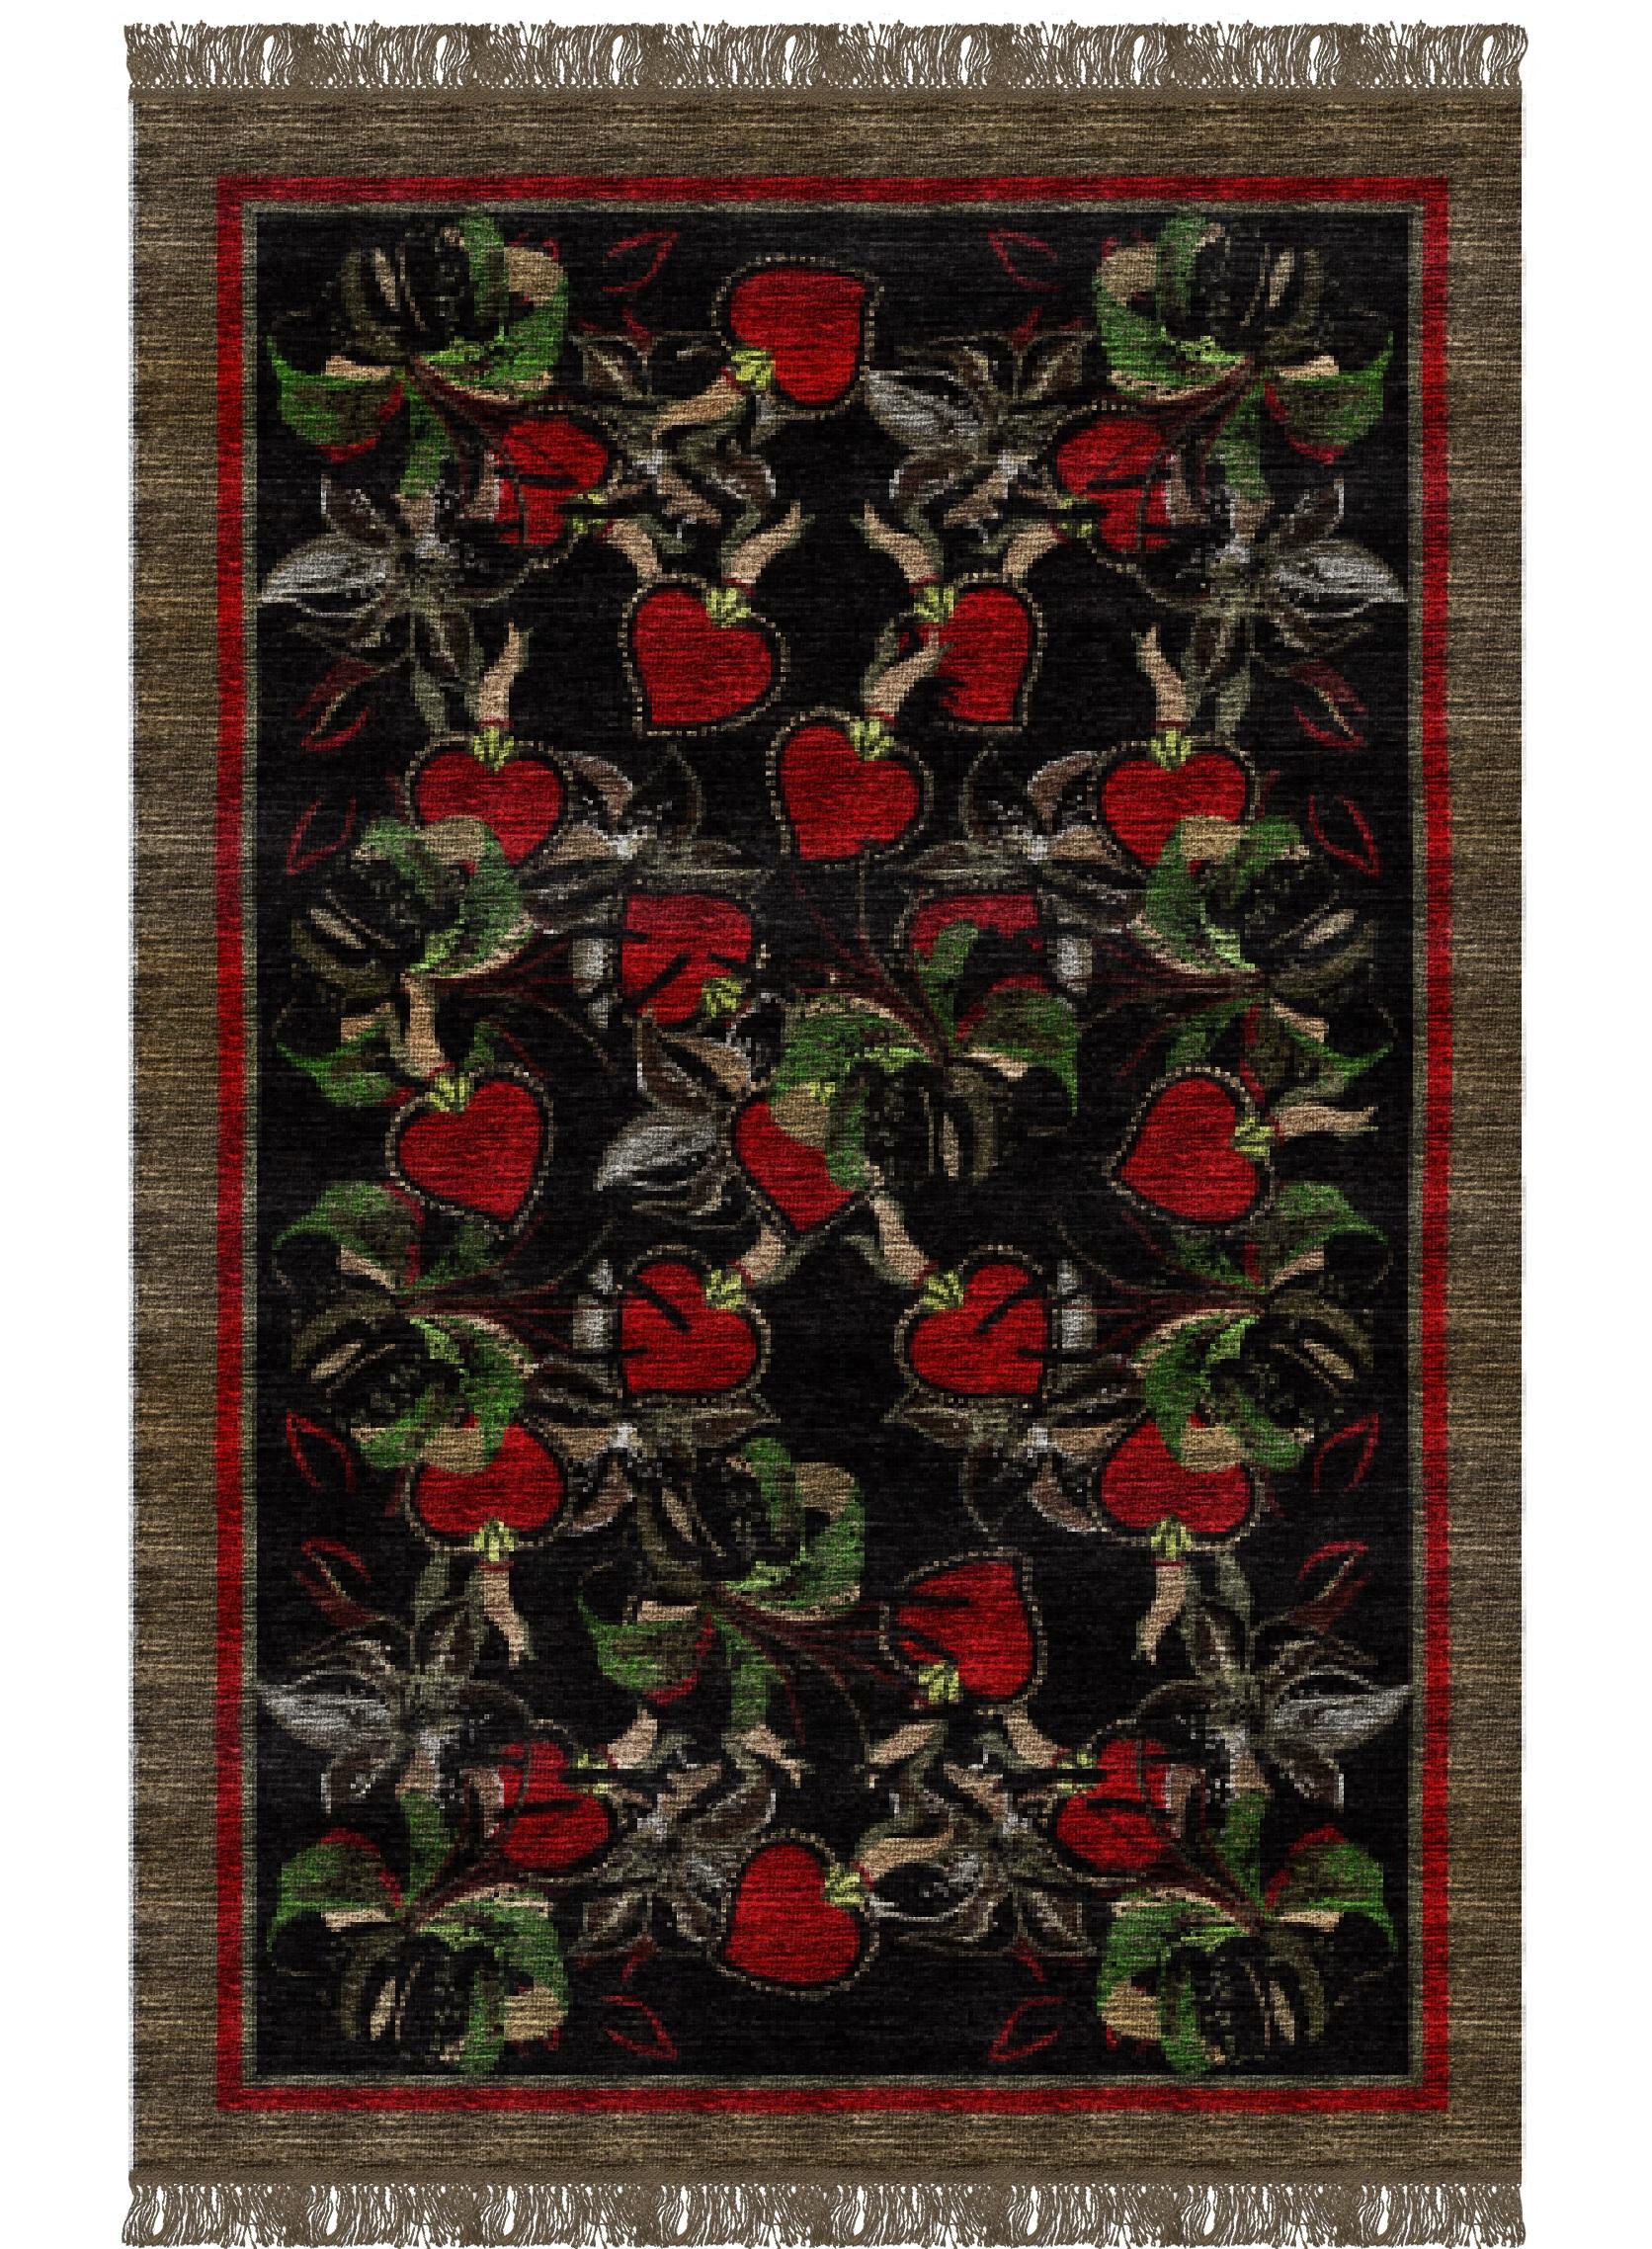 Cuori rug III by Giulio Brambilla
Dimensions: D 300 x W 200 x H 0.5 cm
Materials: NZ wool, melange yarn

Named after the Italian word for “heart“, this rug is part of a refined collection of rugs designed by Giulio Brambilla that are hand woven